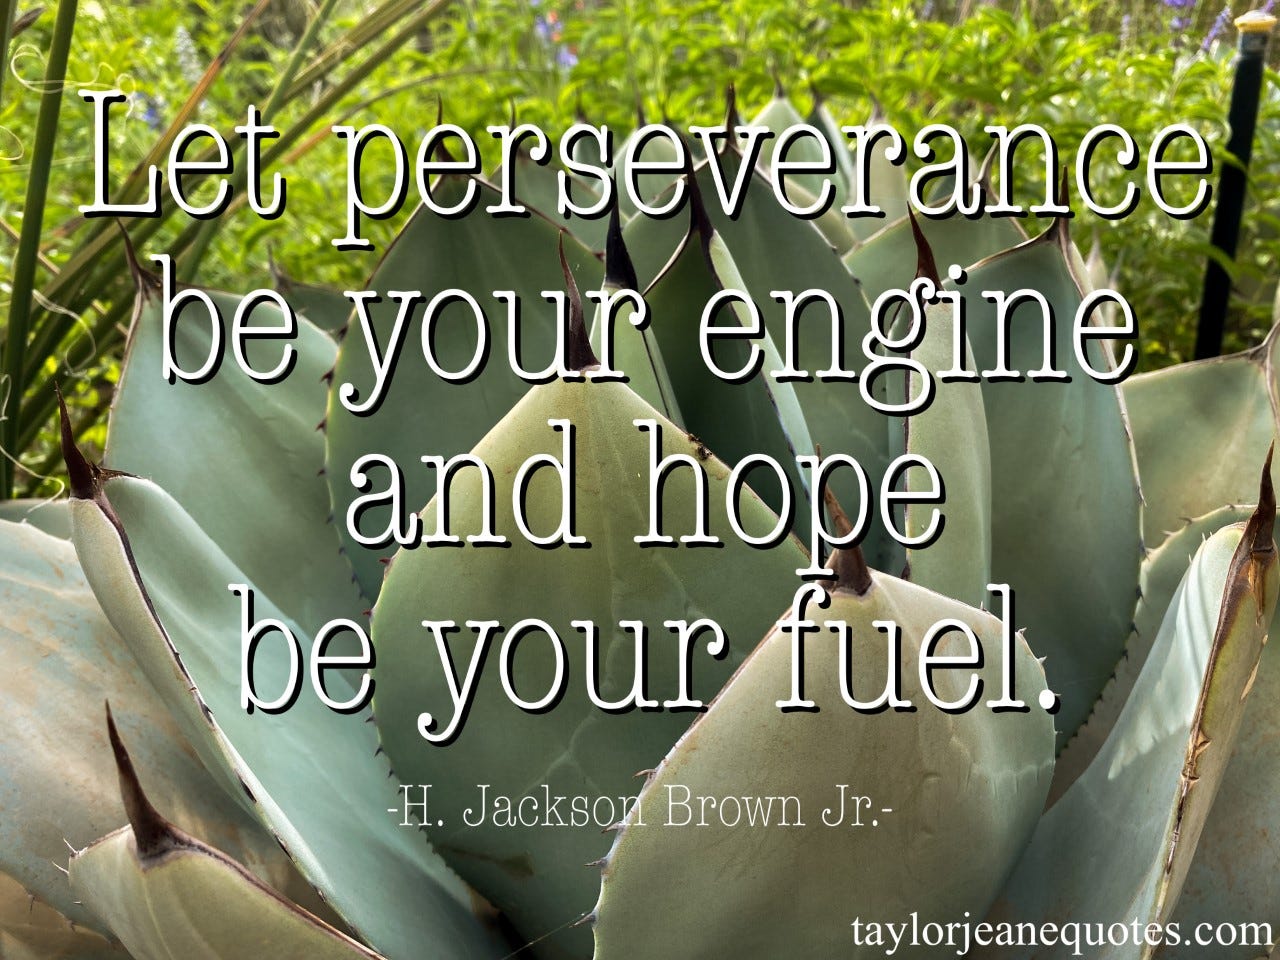 taylor jeane quotes, taylor jeane, taylor wilson, inspirational quotes, motivational quotes, positive quotes, life quotes, perseverance quotes, hope quotes, car quotes, engine quotes, fuel quotes, purpose quotes, goal quotes, mindset quotes, friday quotes, h jackson brown jr, h jackson brown jr quotes, arizona, aloe